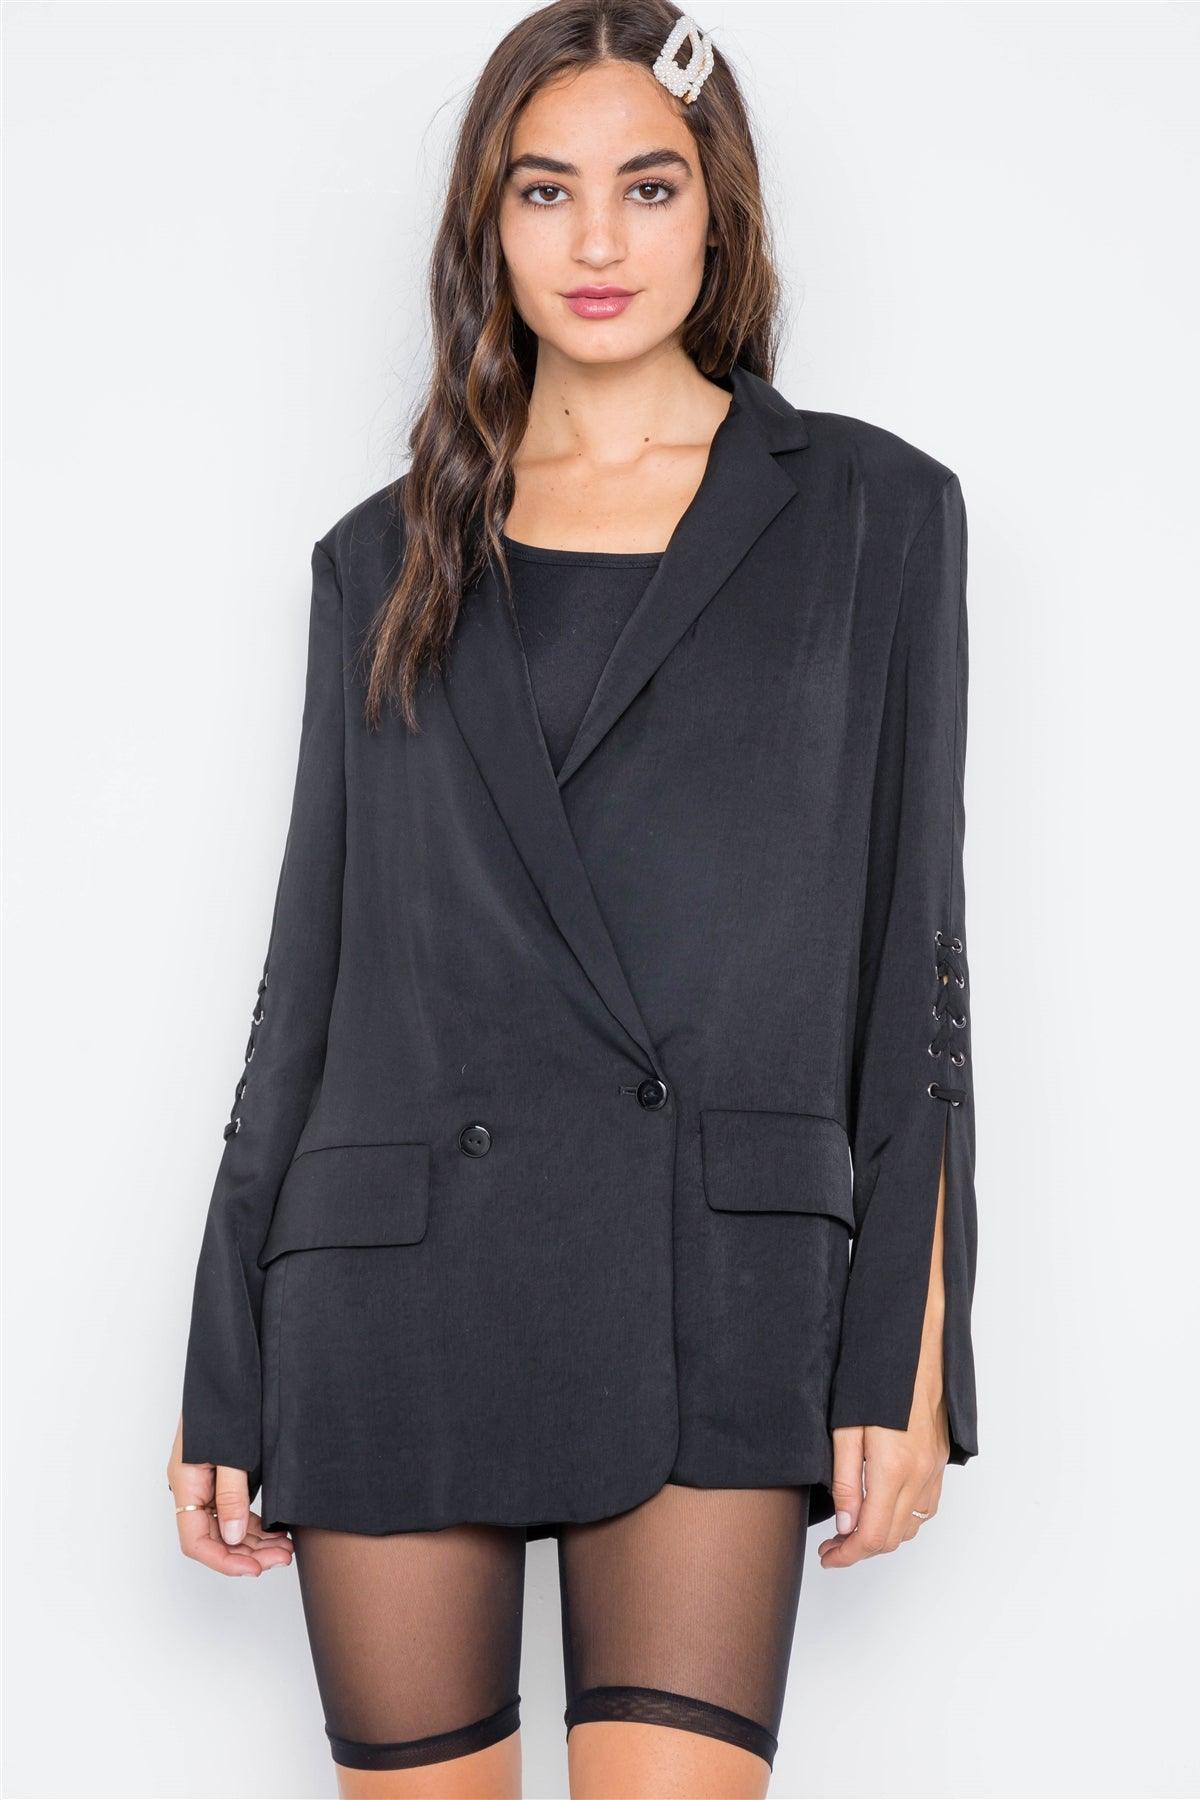 Black Long Lace-Up Sleeves Solid Blazer Jacket  /3-3